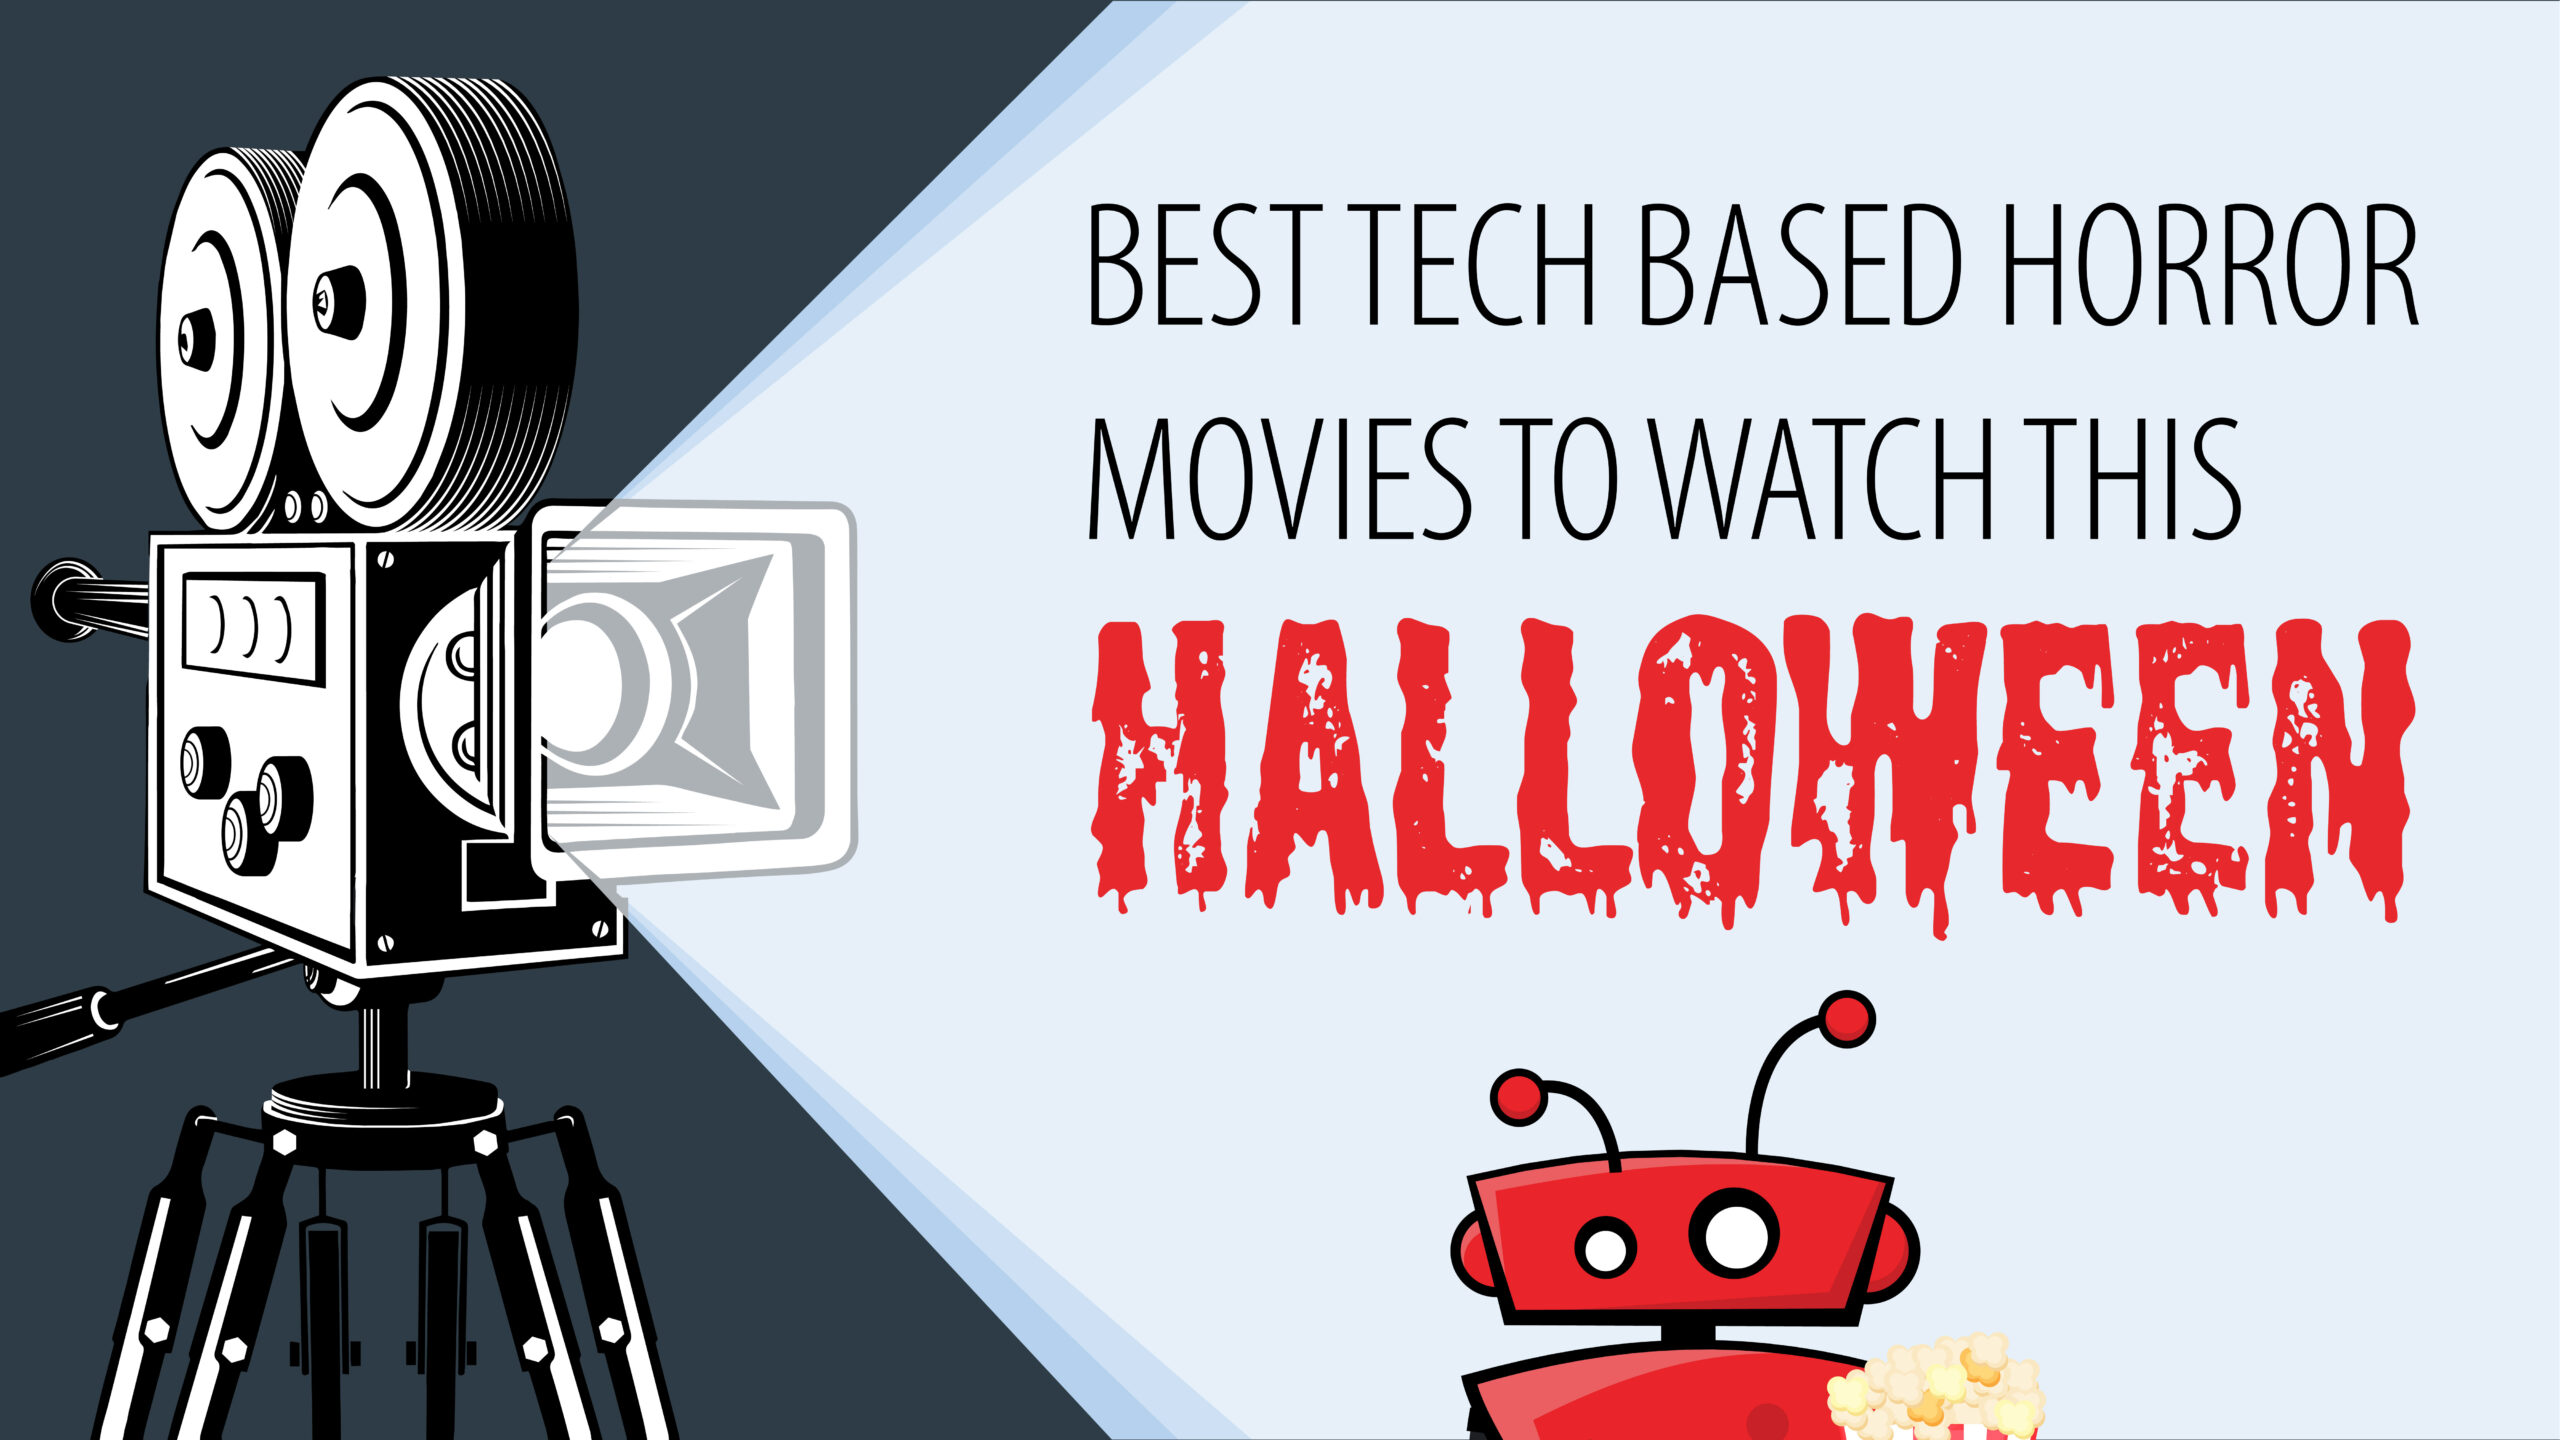 Best Tech Horror Movies to Watch This Halloween Season